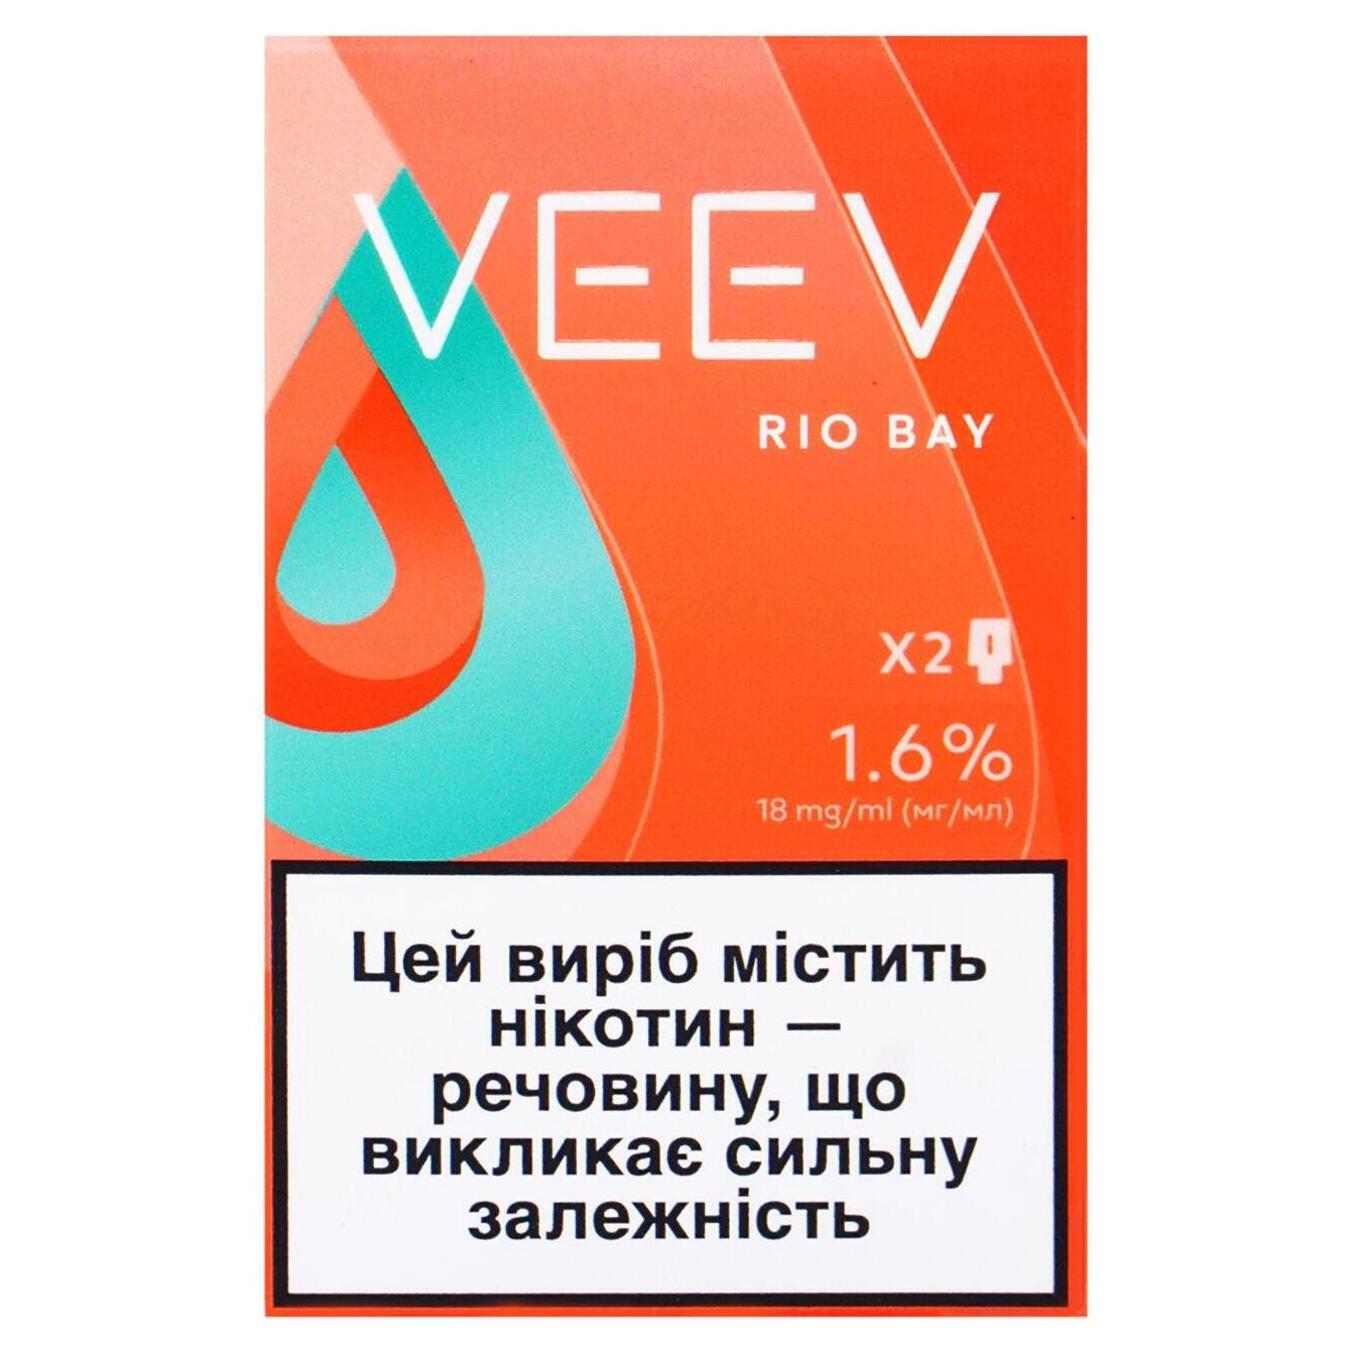 Cartridge VEEV Rio Bay 1.6% (the price is indicated without excise duty)